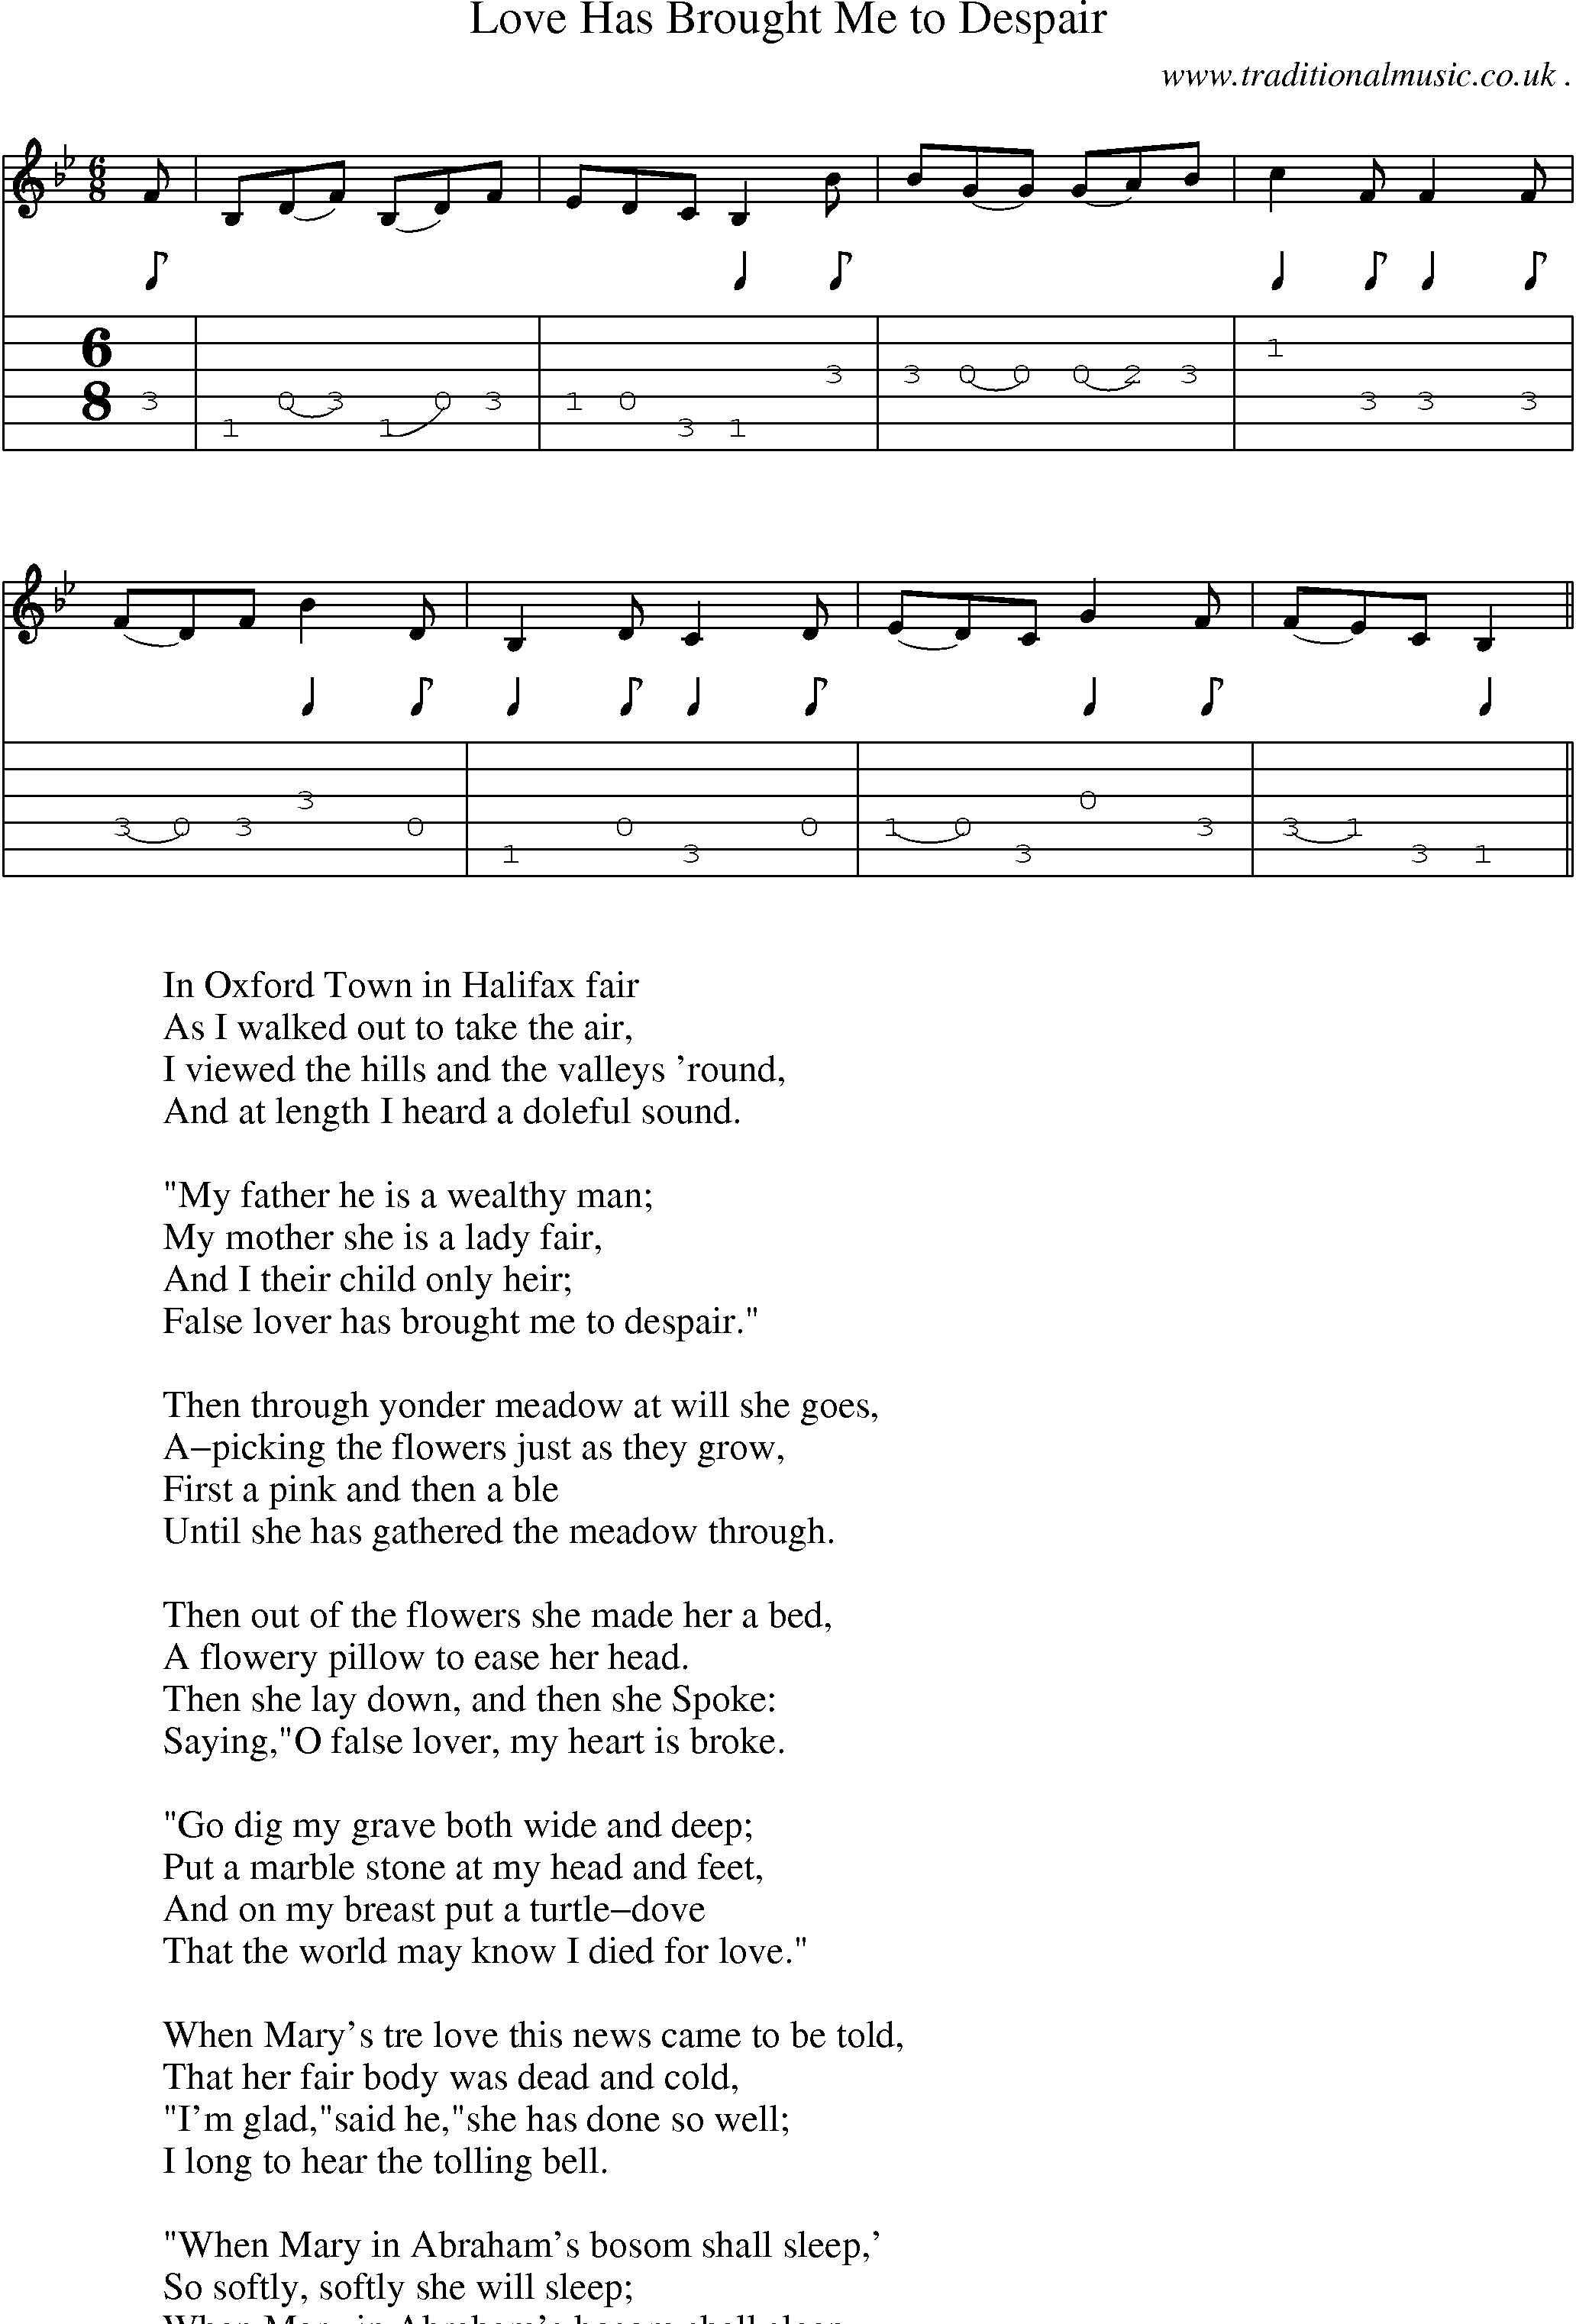 Sheet-Music and Guitar Tabs for Love Has Brought Me To Despair